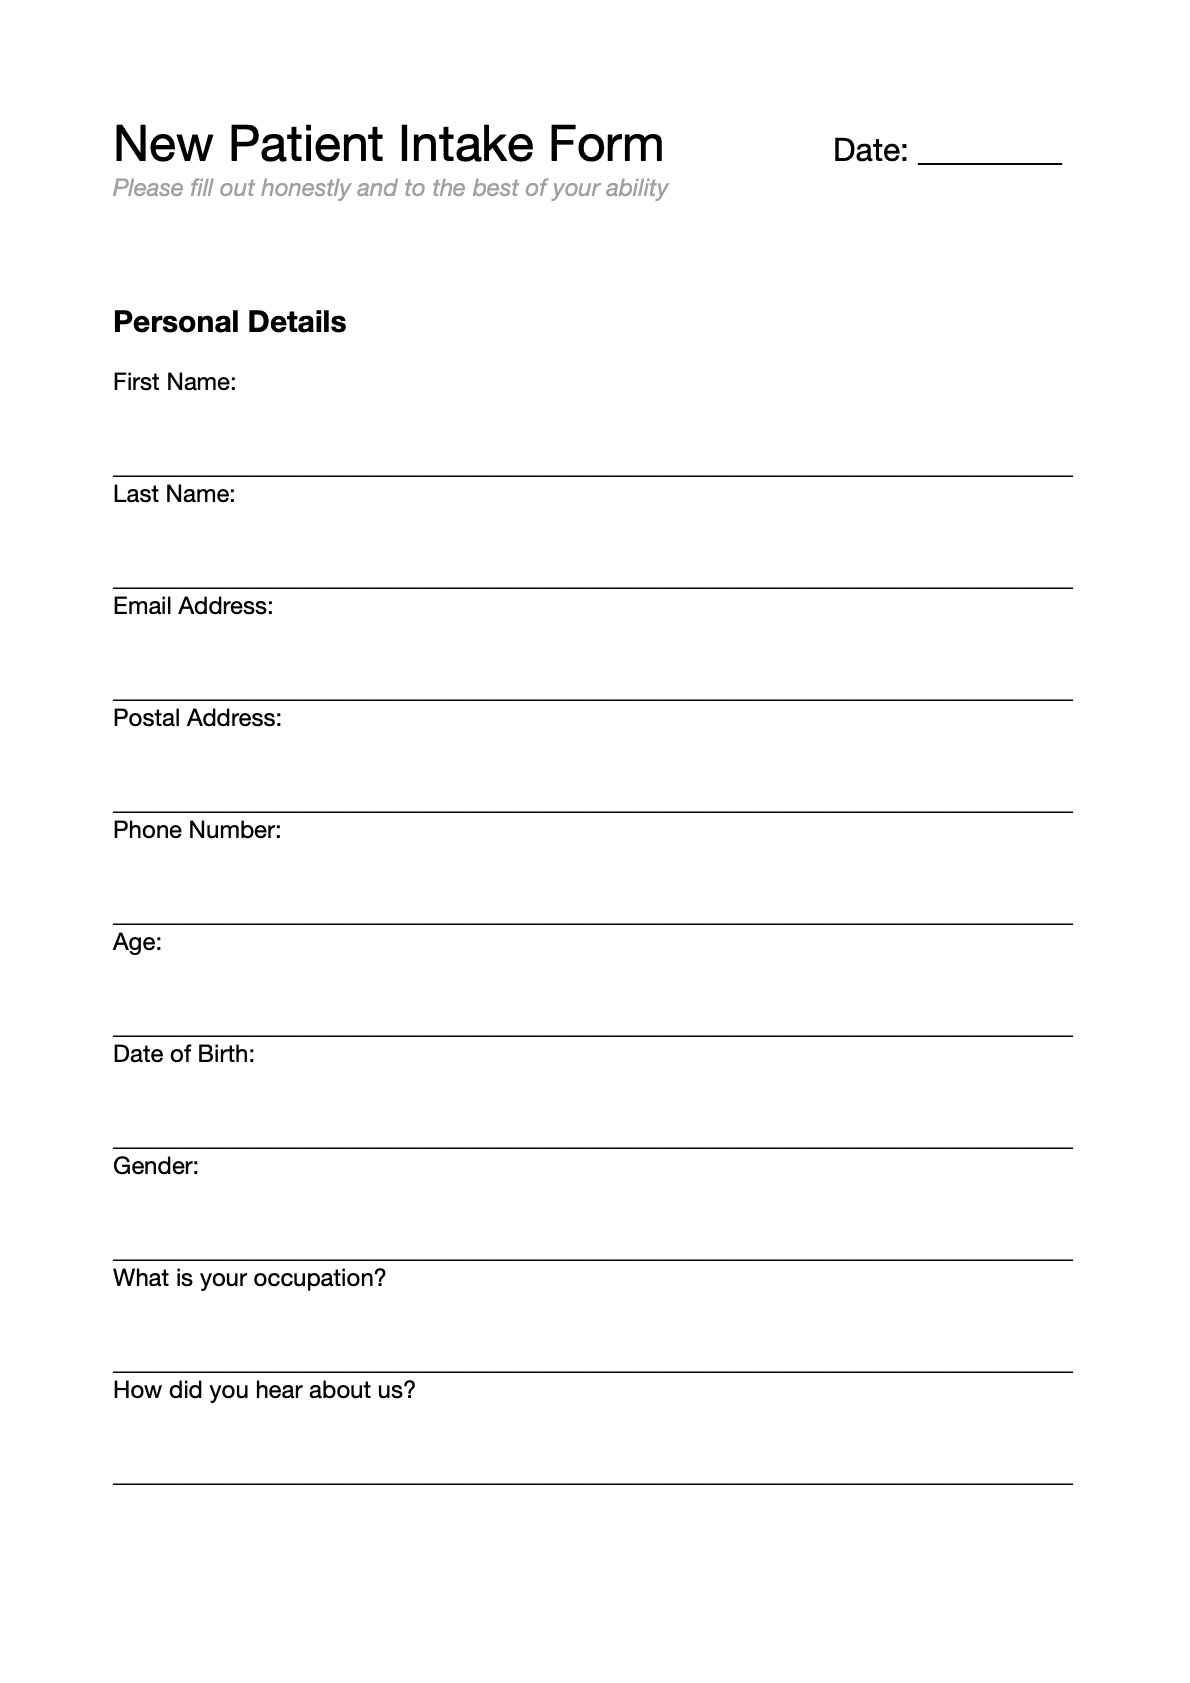 New Patient Intake Forms Printable 3558